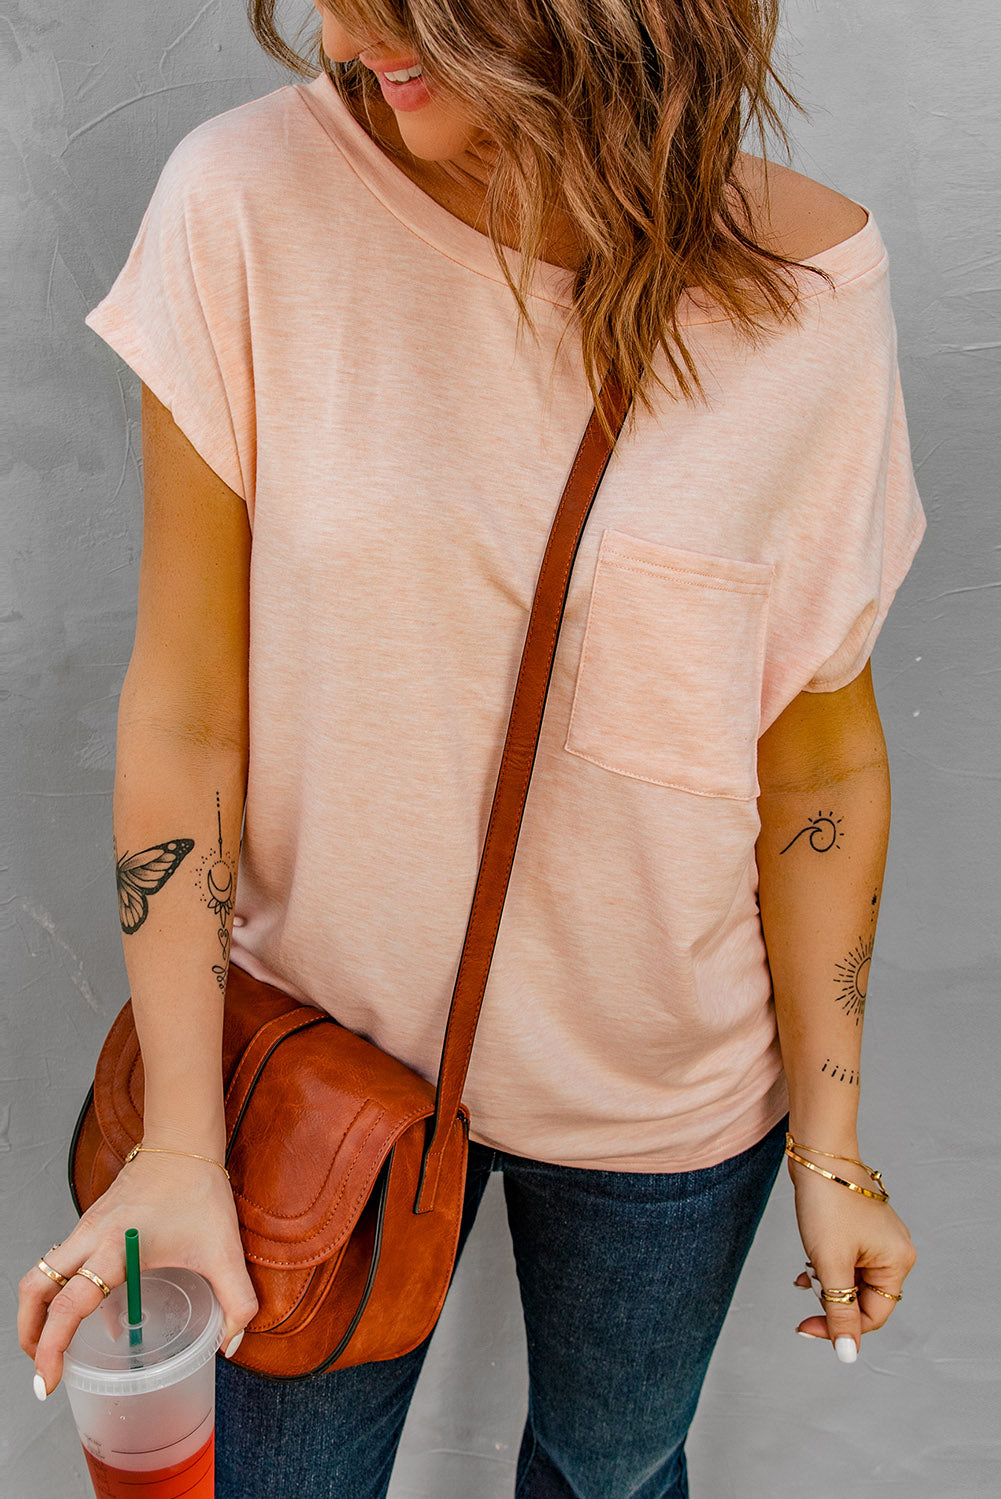 Pink Short Sleeve Basic T Shirt with Patch Pocket